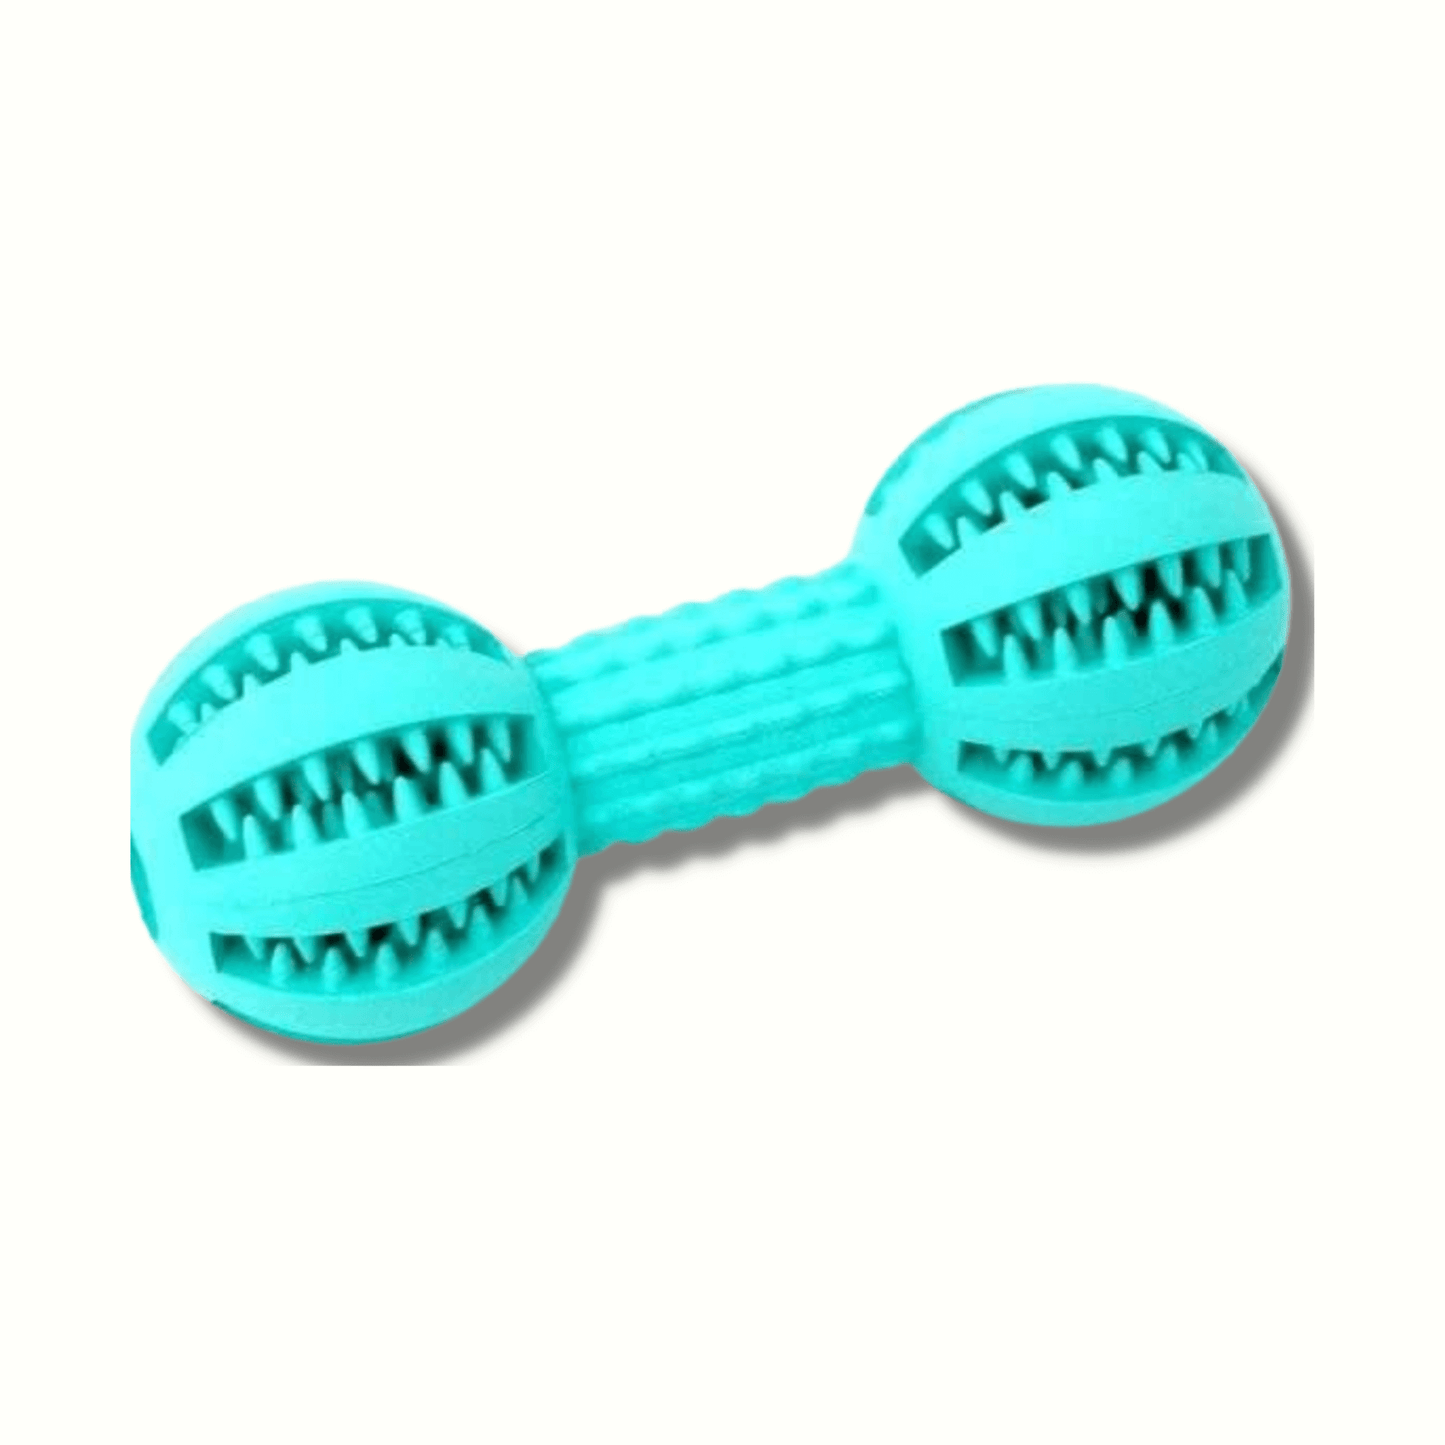 Let's Pawty interactive dumbbell dog toy